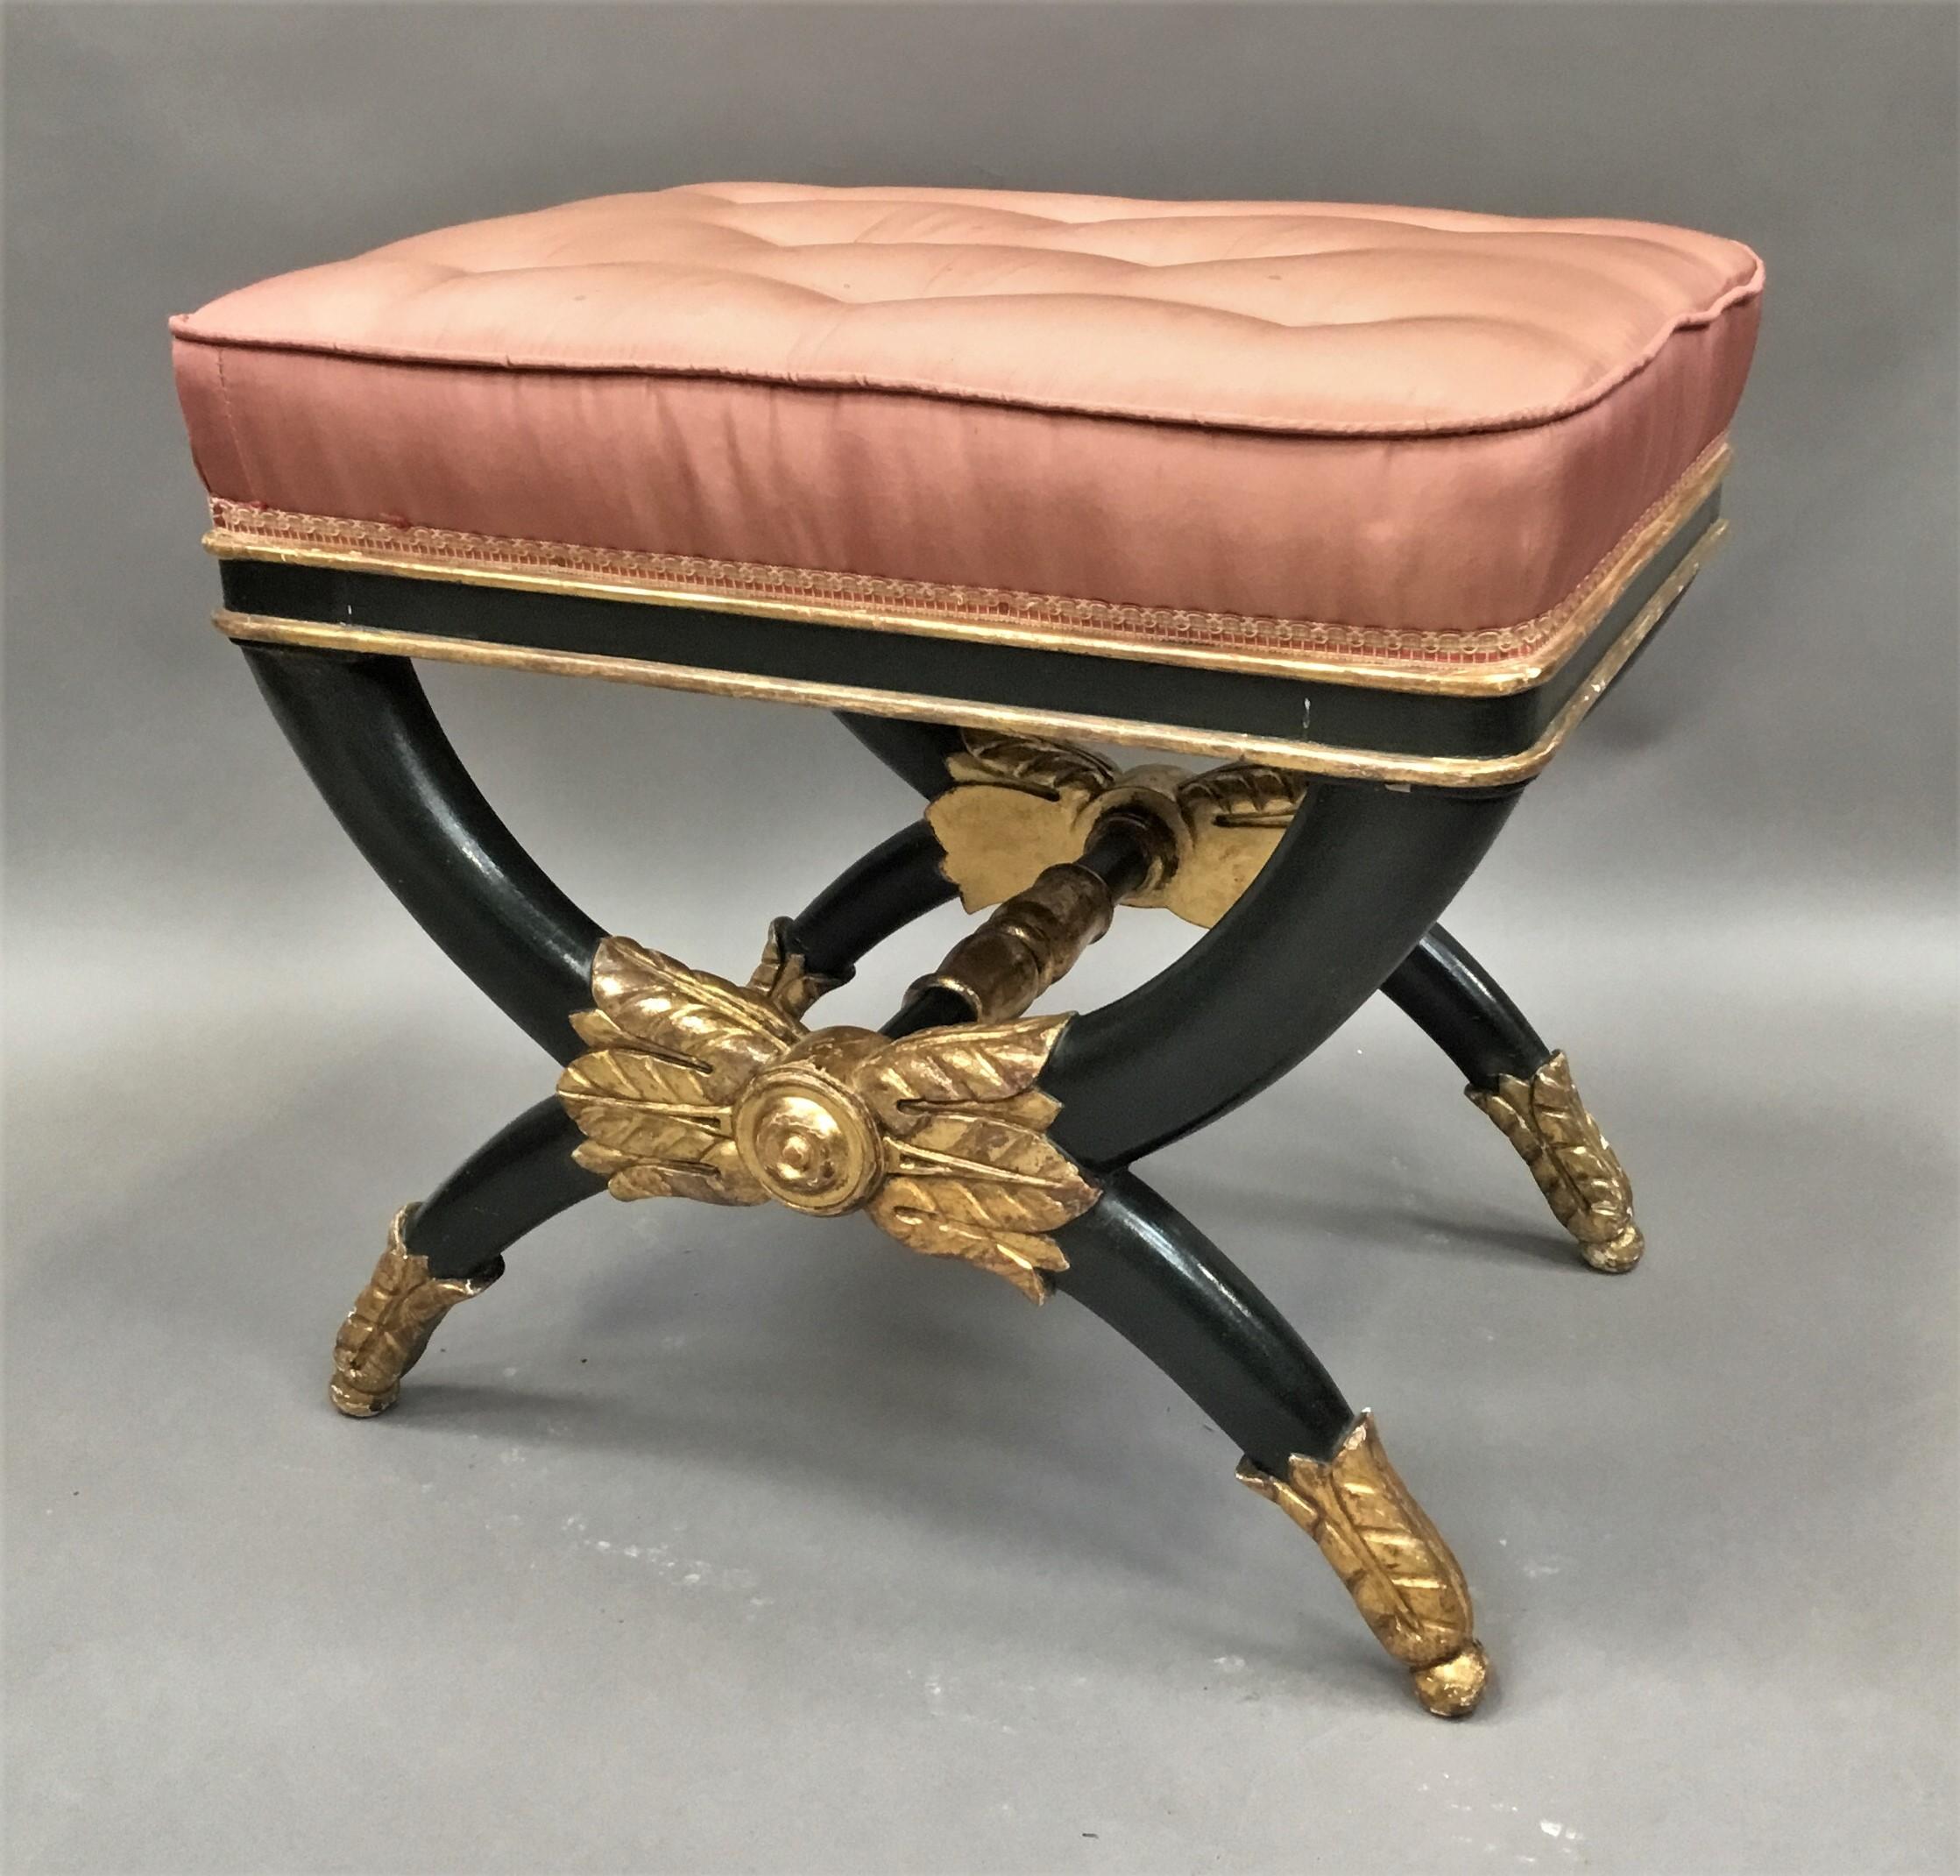 Good Regency /Empire 'X' frame stool, decorated with parcel gilt and dark green to simulate bronze; the rectangular padded buttoned seat upholstered in pink silk on the shallow seat frame, with rounded corners and gilt mouldings top and bottom.